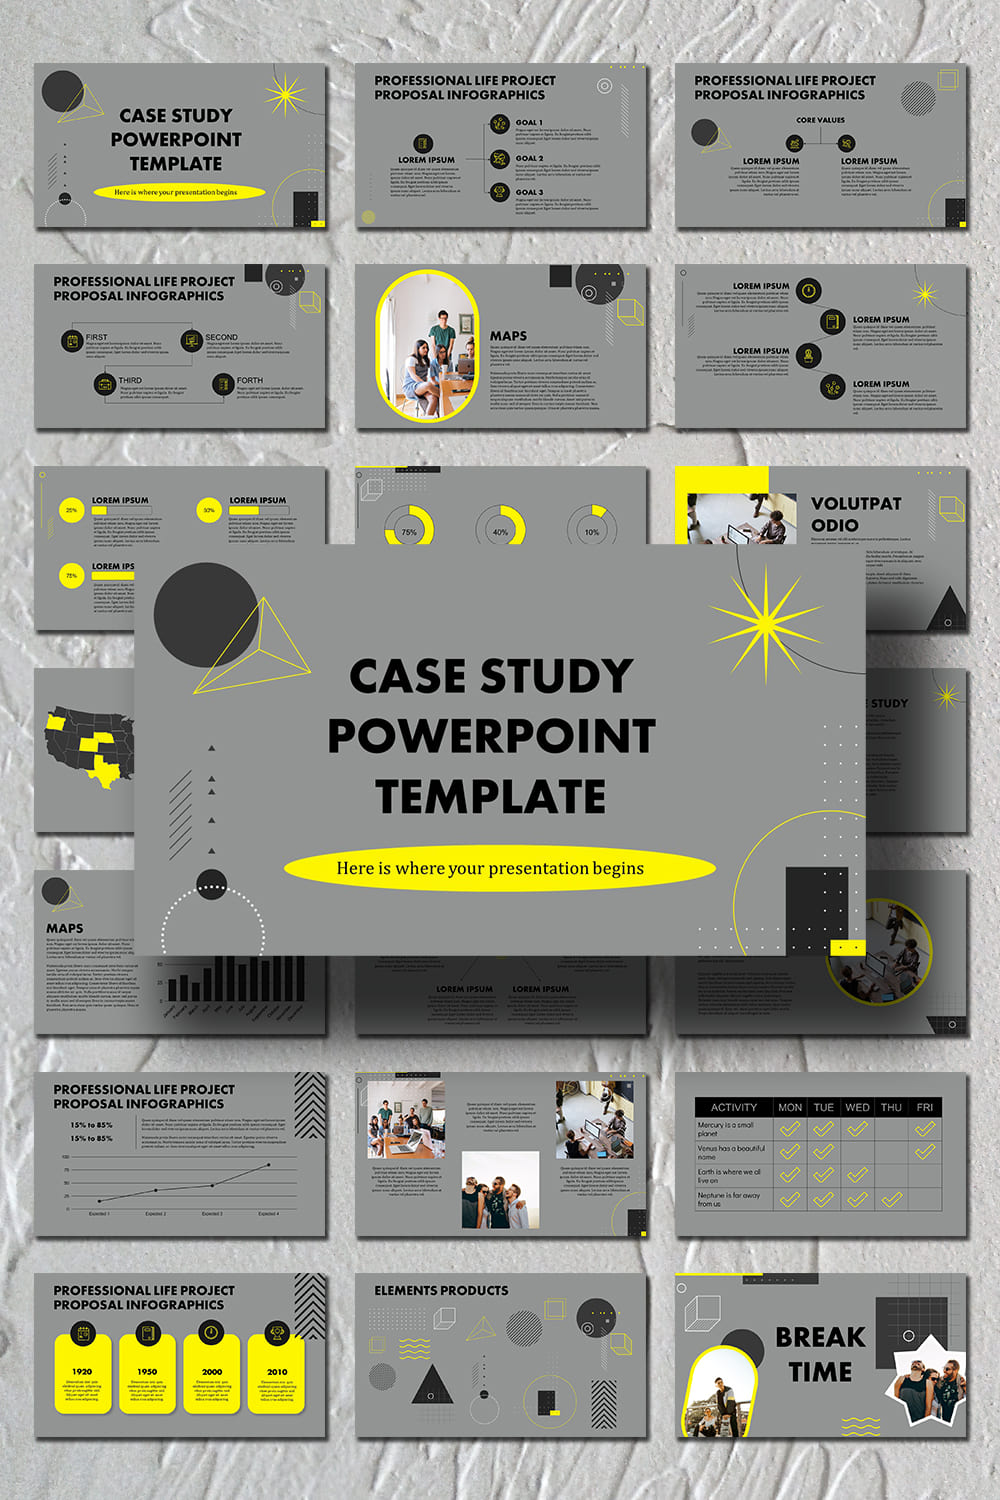 Case Study Powerpoint Template - pinterest image preview.